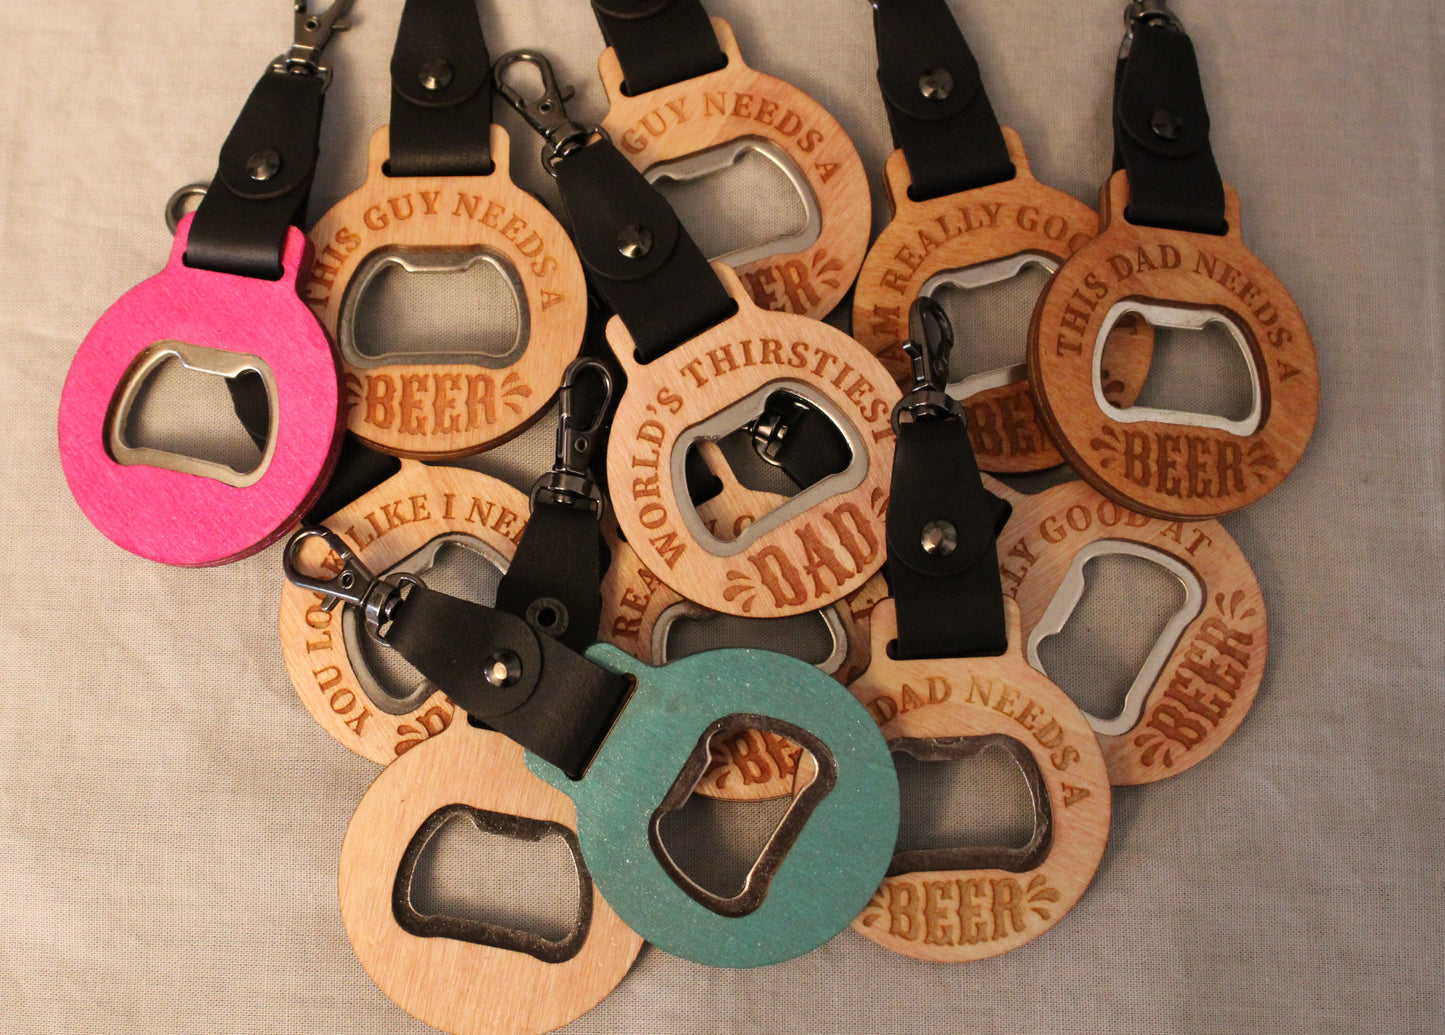 This Guy Needs a Beer Keychain Bottle Opener